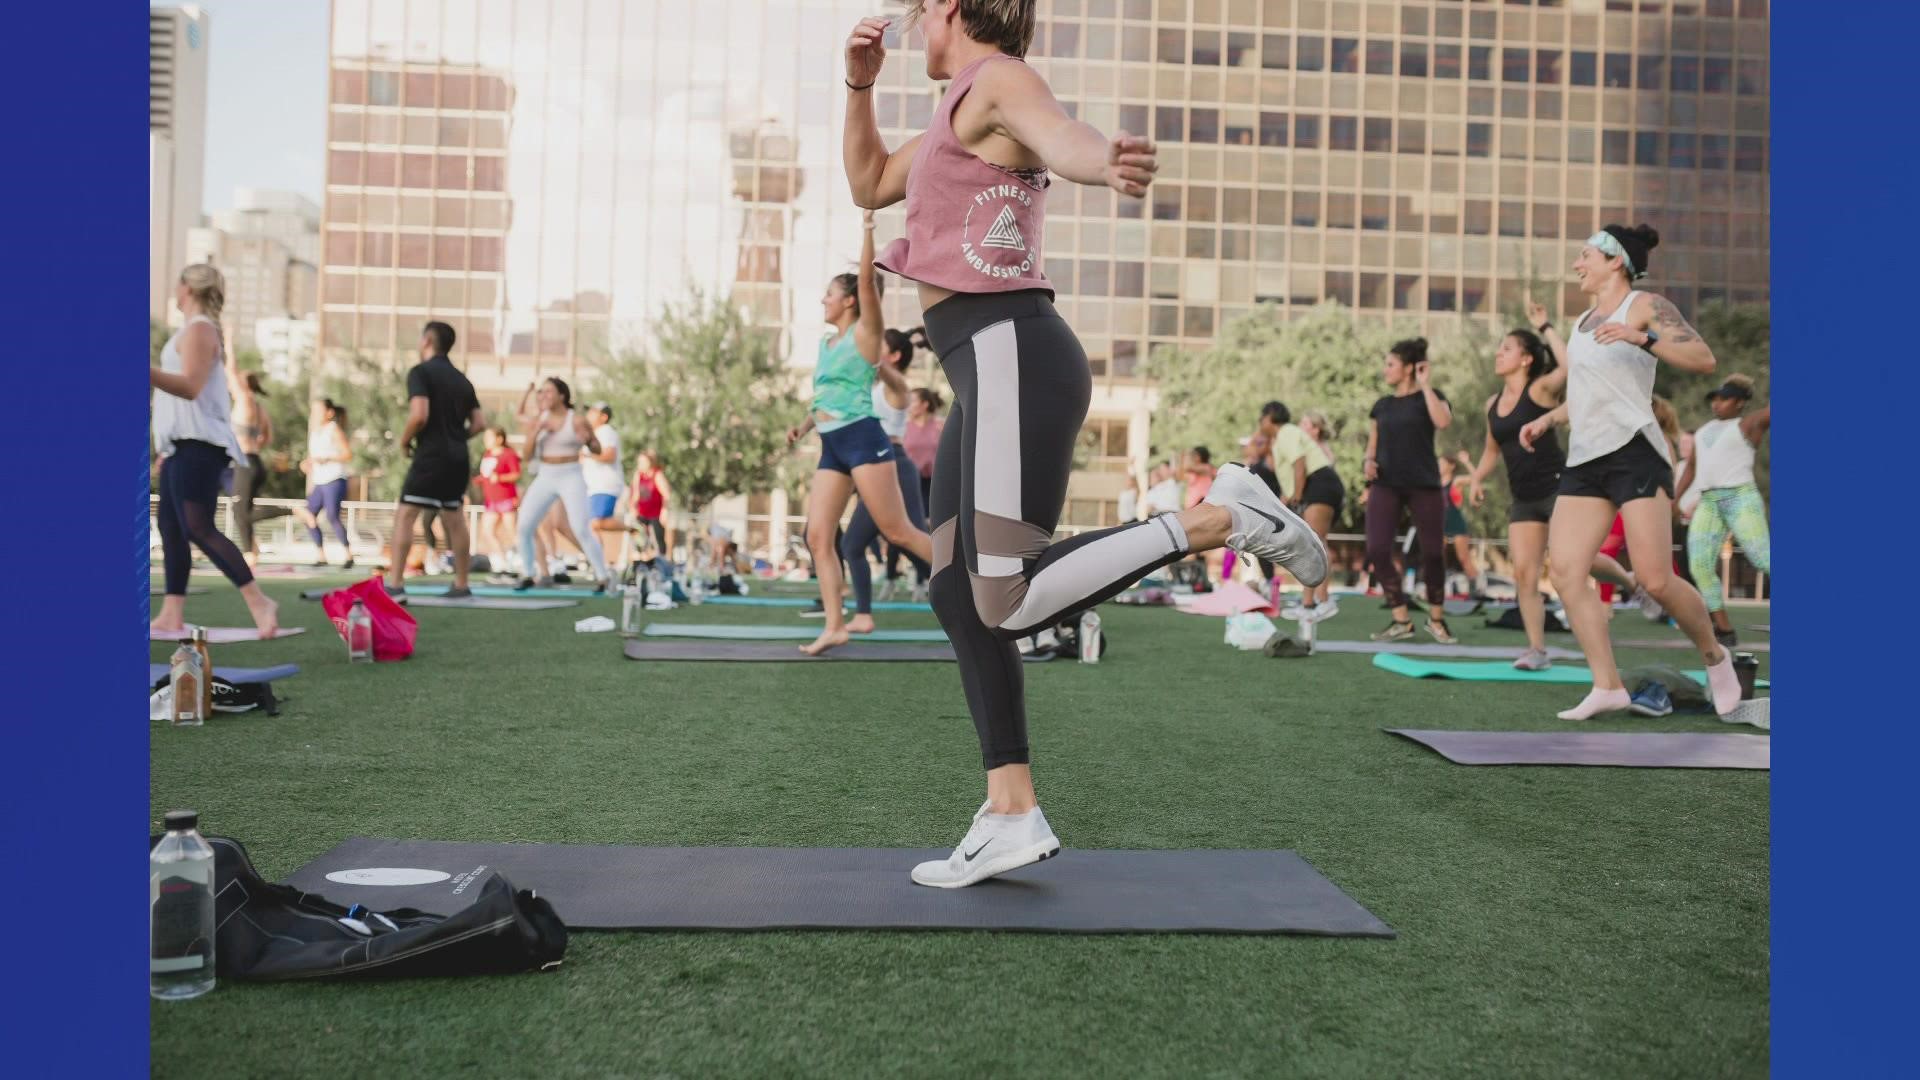 FAME Fest is a festival in Dallas focused on fitness, art and music. It's happening this weekend.